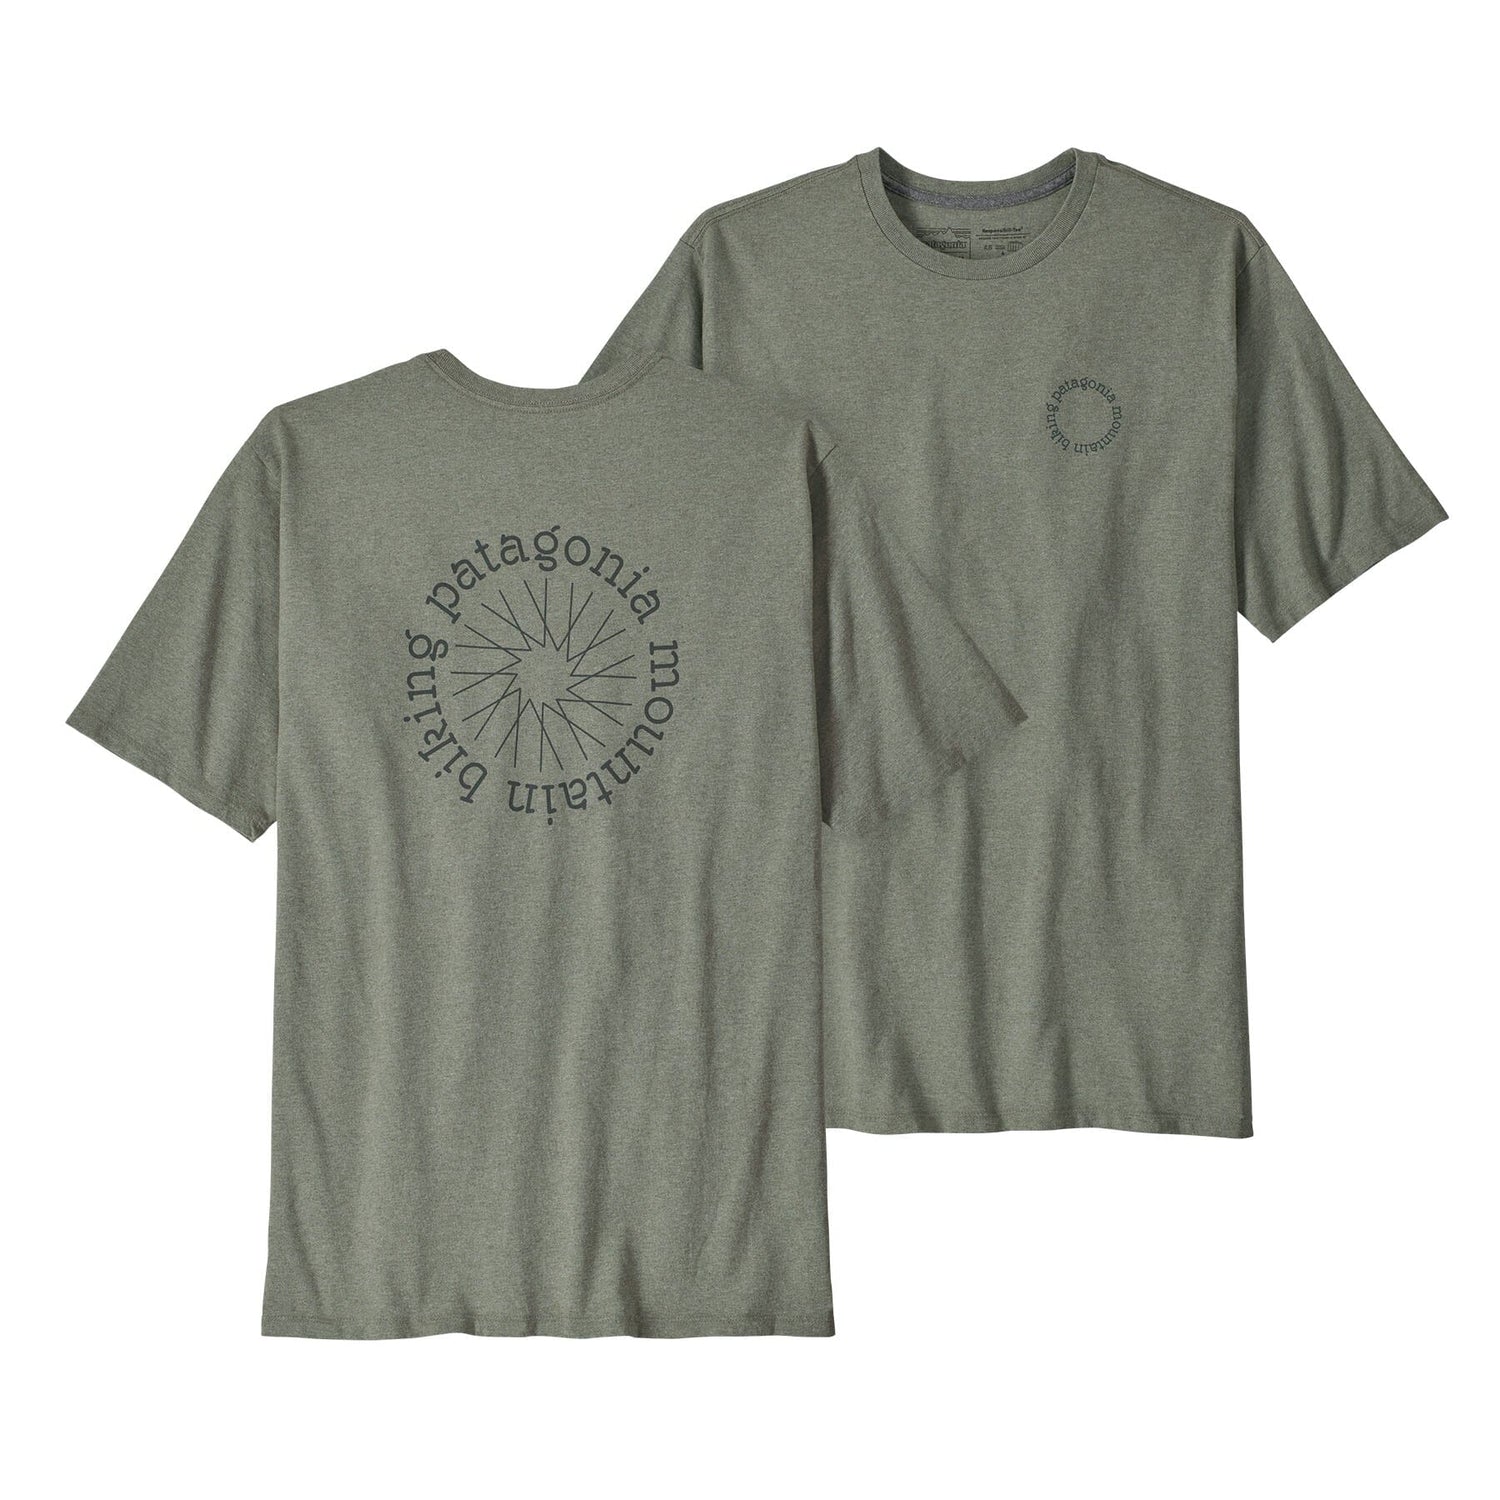 Patagonia M's Spoke Stencil Responsibili-Tee - Recycled Cotton & Recycled Polyester Sleet Green Shirt